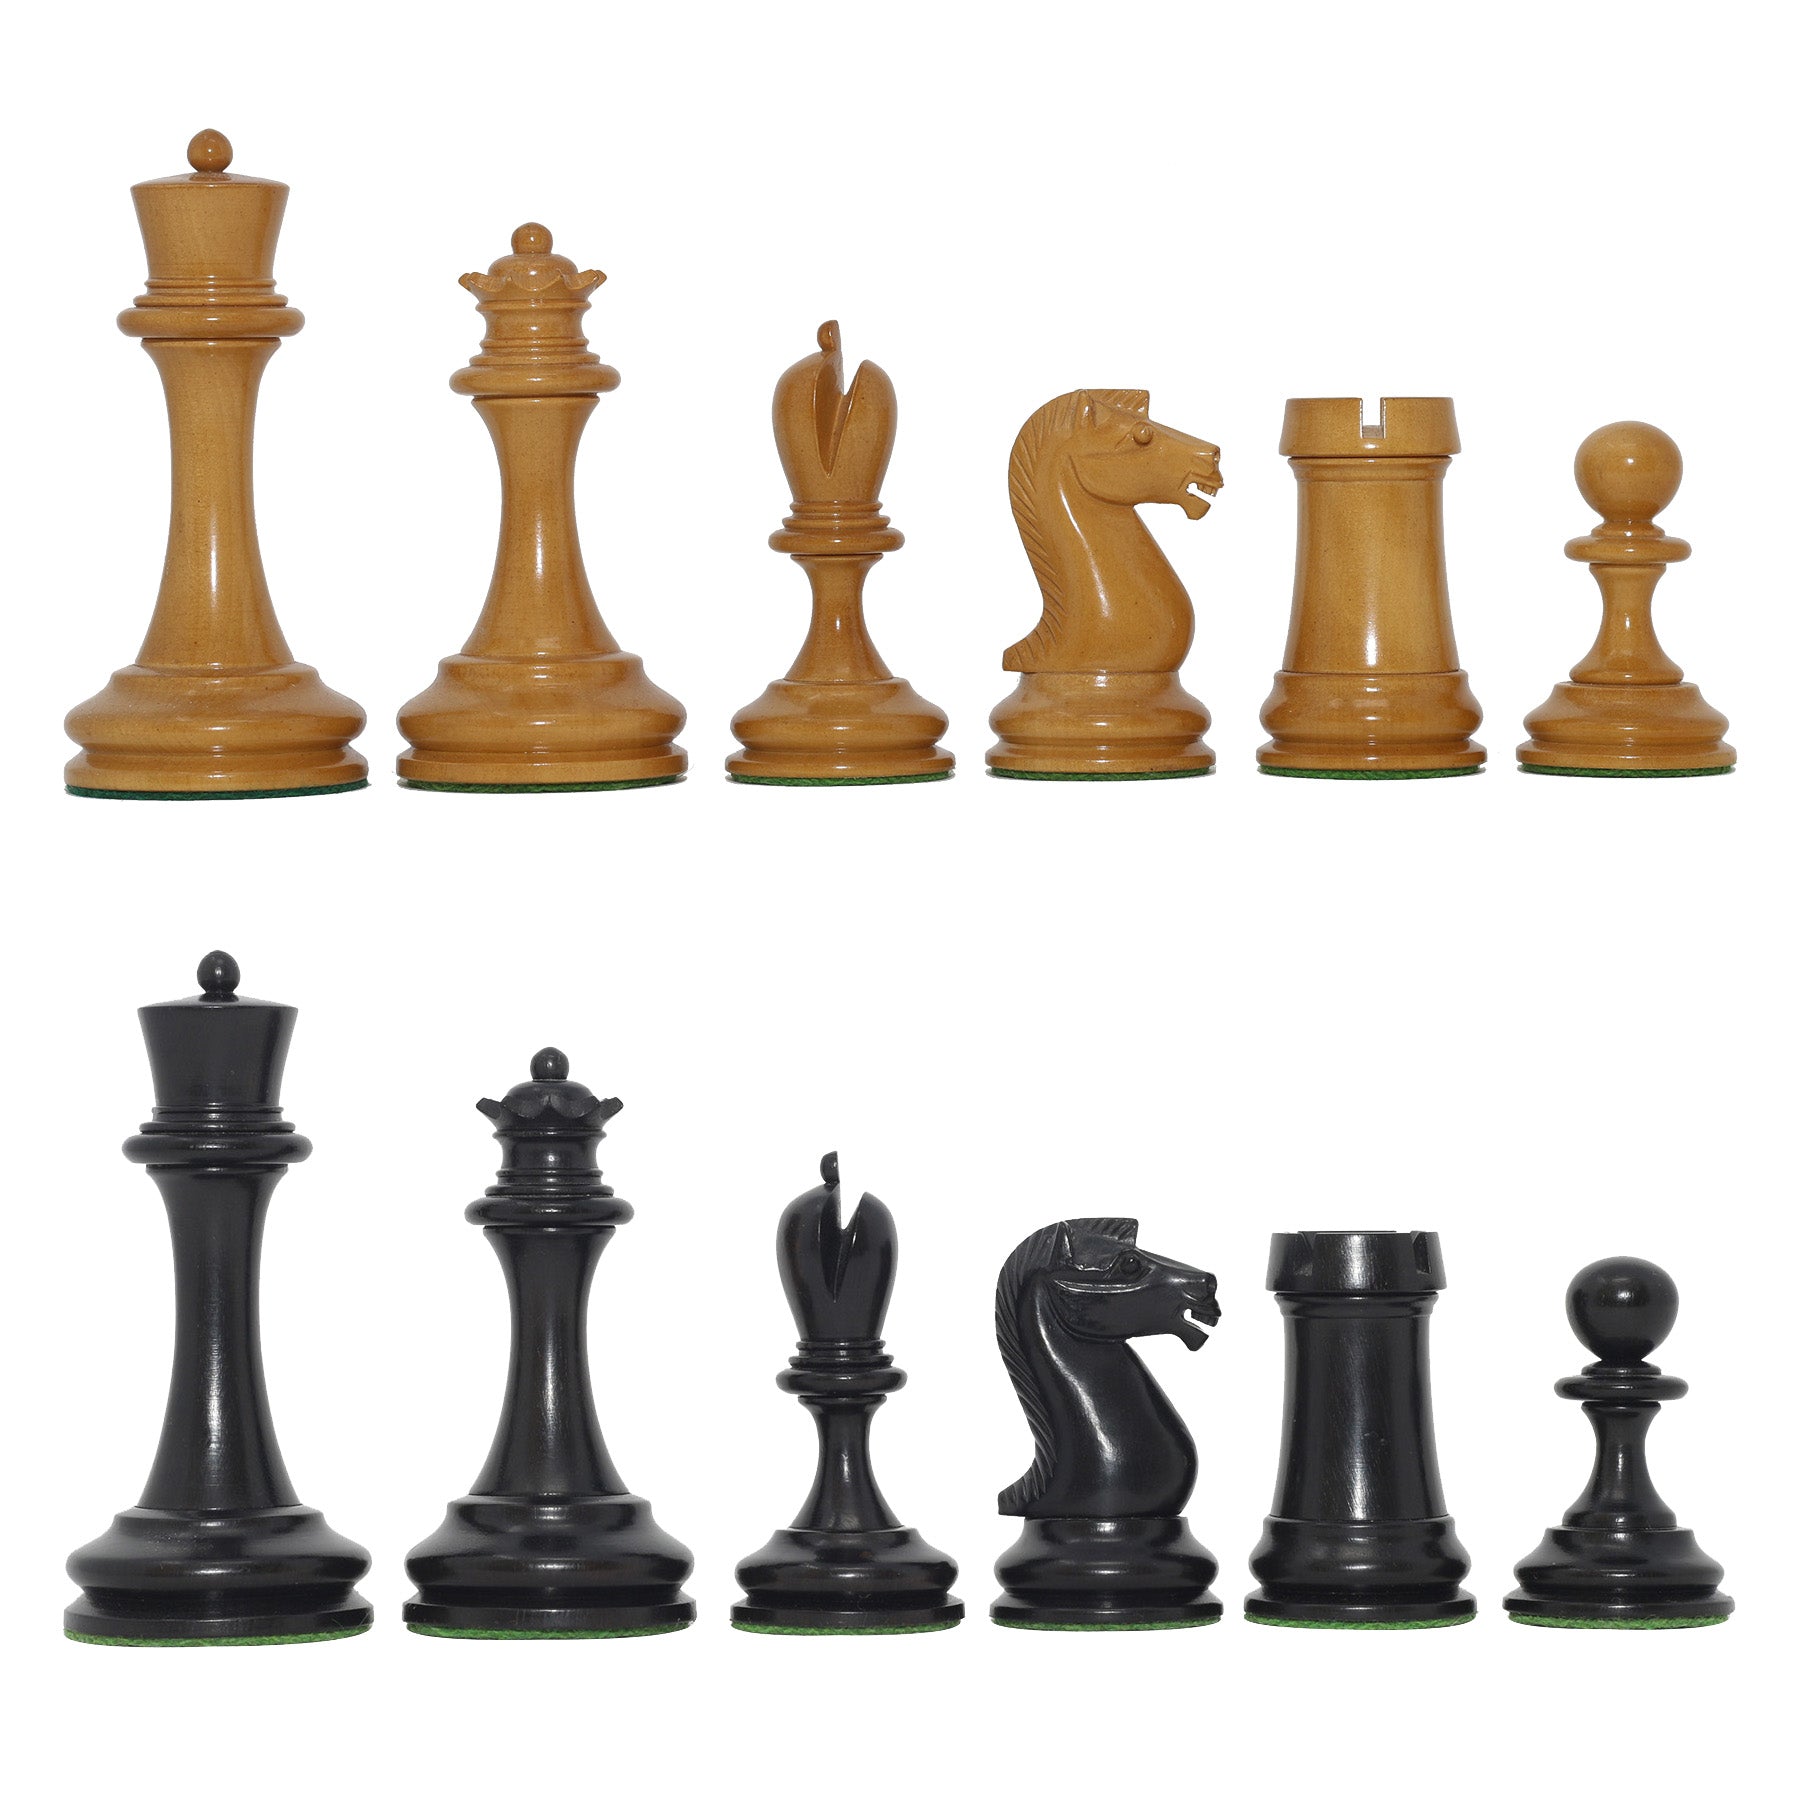 57 Chess Pieces Facts You Must Know - TheChessWorld